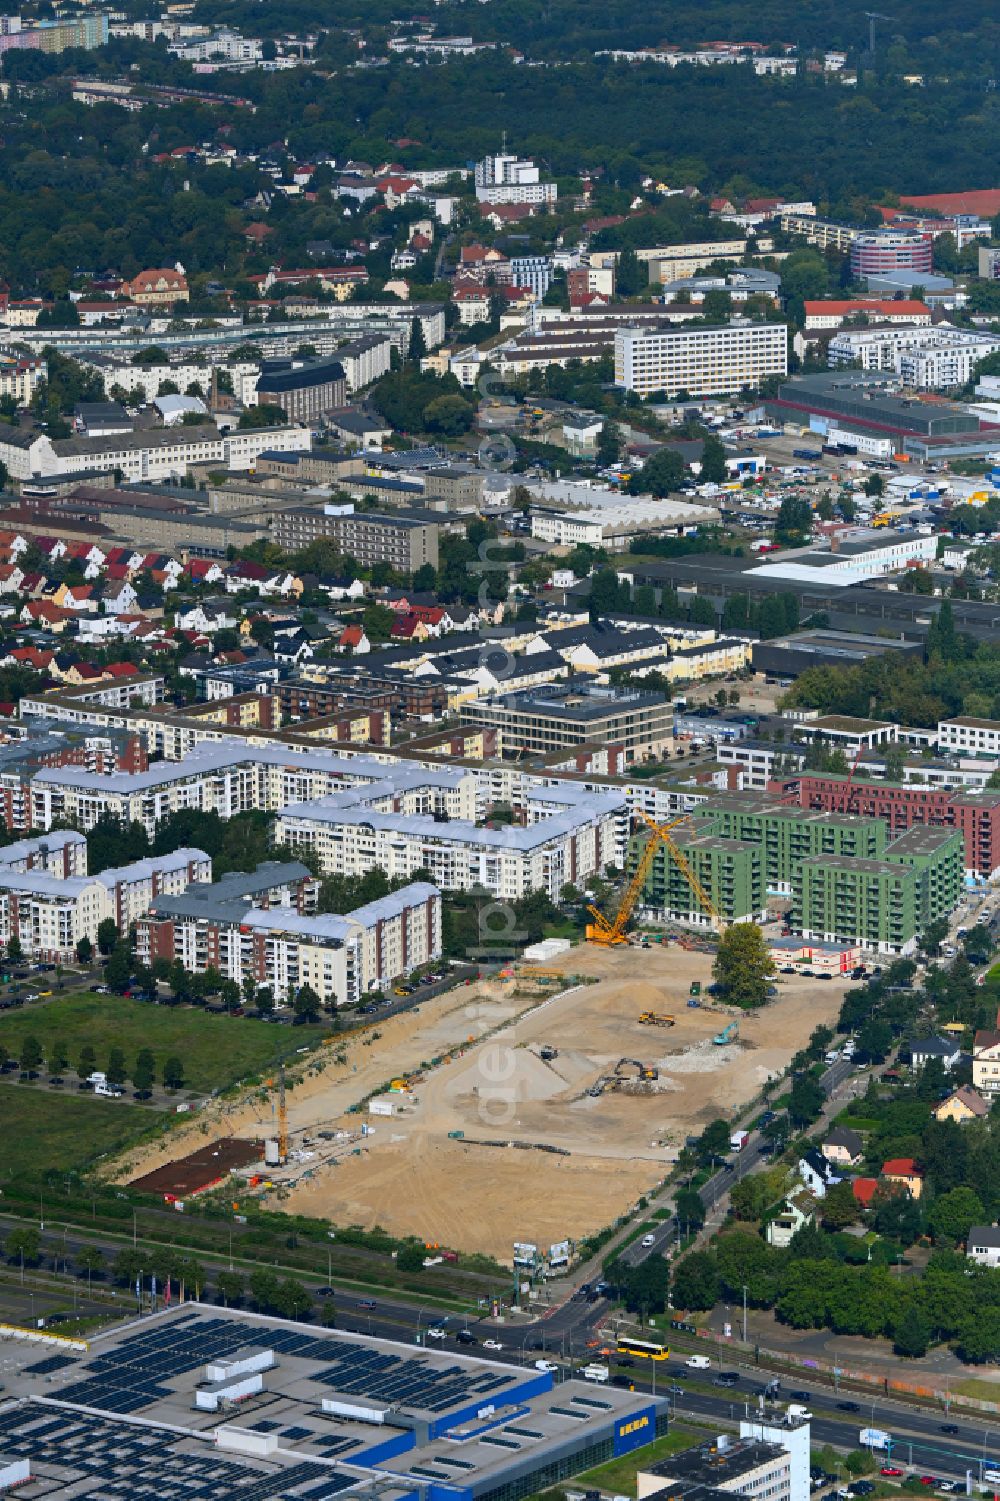 Berlin from the bird's eye view: Construction site to build a new multi-family residential complex Weisse Taube between Ferdinand-Schultze-Strasse, Plauener Strasse and Landsberger Allee in the district Hohenschoenhausen in Berlin, Germany